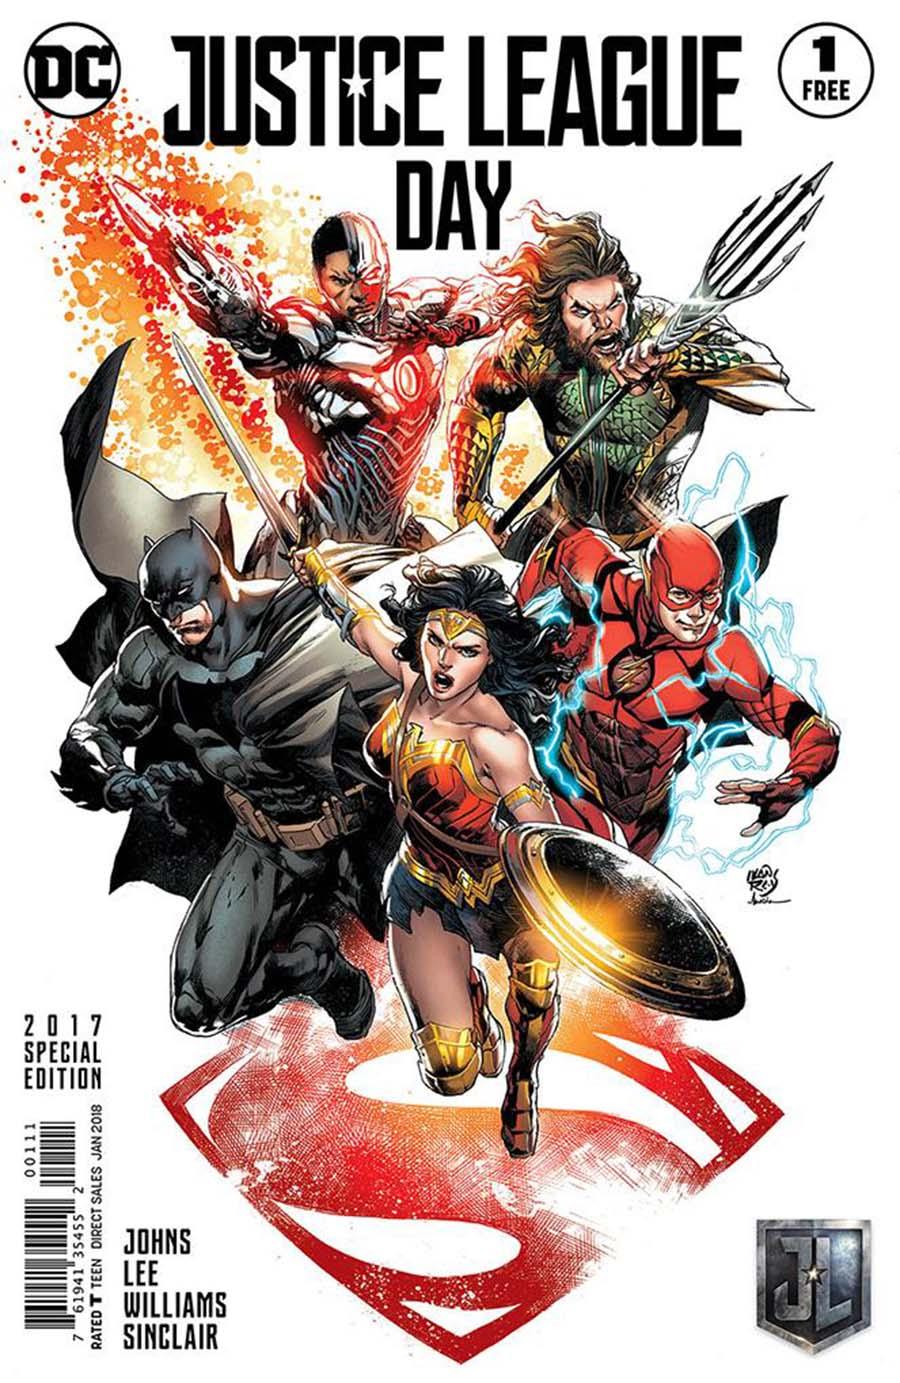 Justice League Day Vol. 1 #1